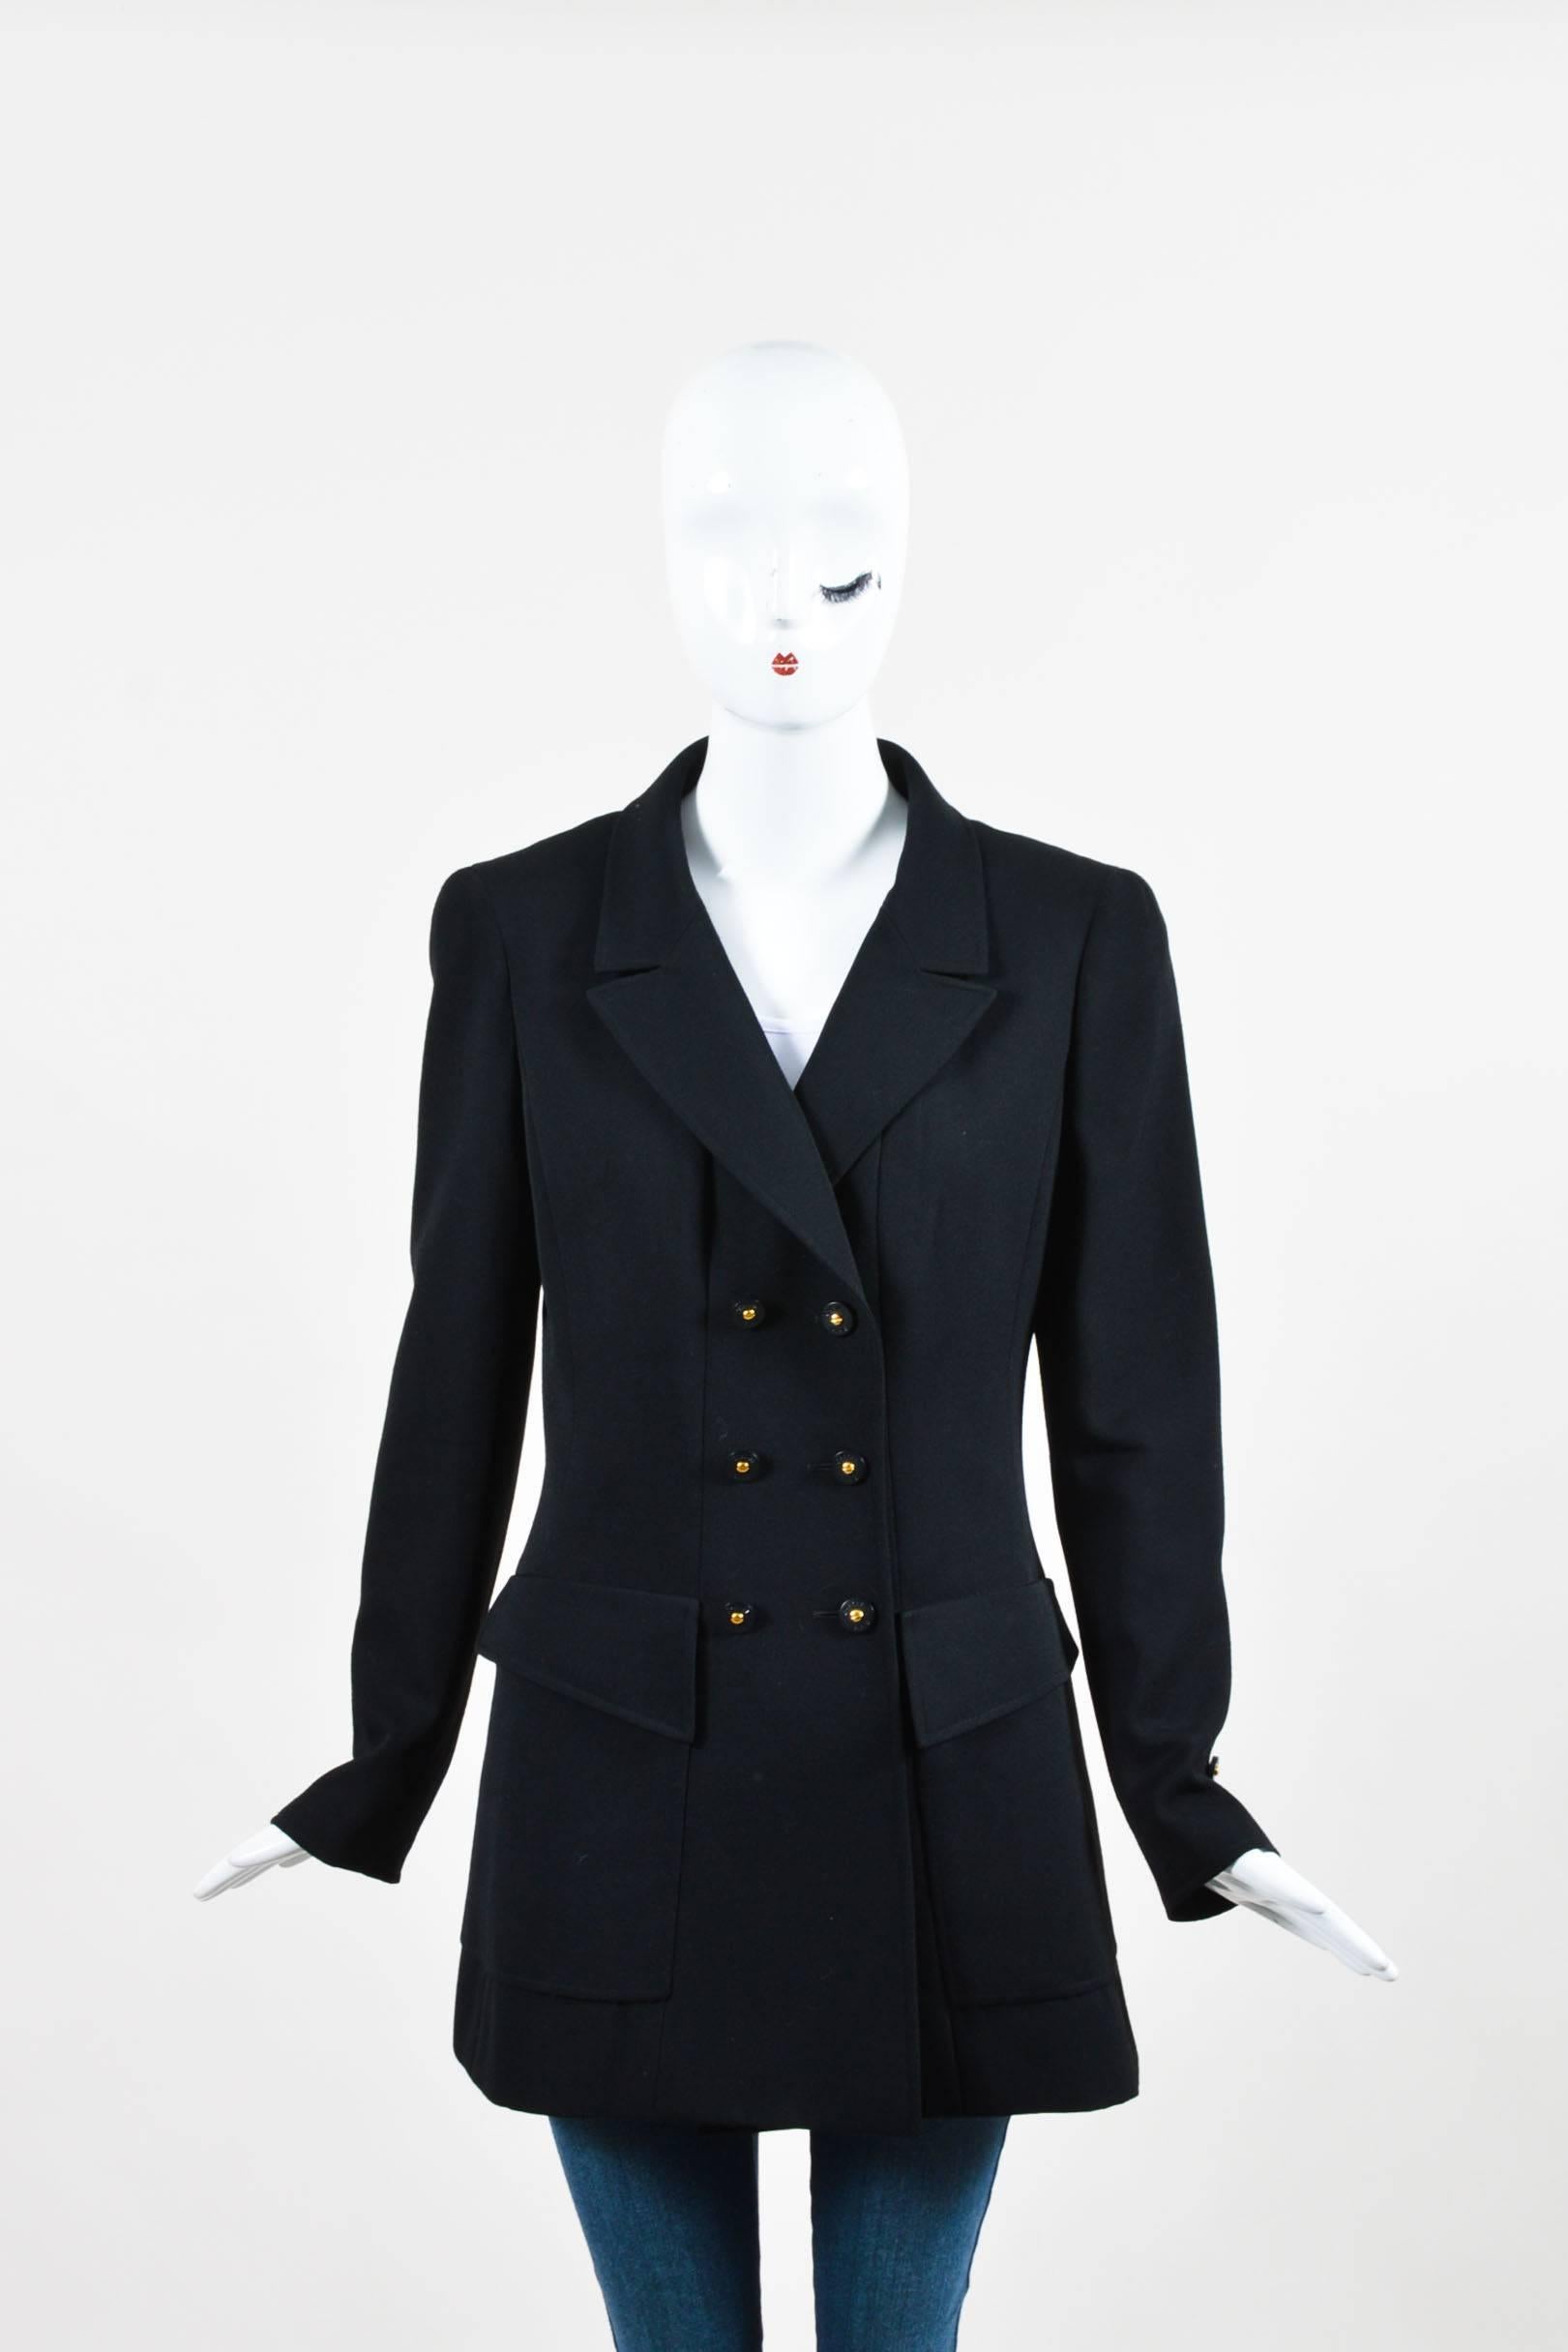 Black blazer from the 1997 Spring Collection. Constructed of wool. Notch collar. Padded shoulders. Long sleeves with button cuffs. Two large front patch pockets. Front double breasted button closure. Black and gold-tone buttons read 